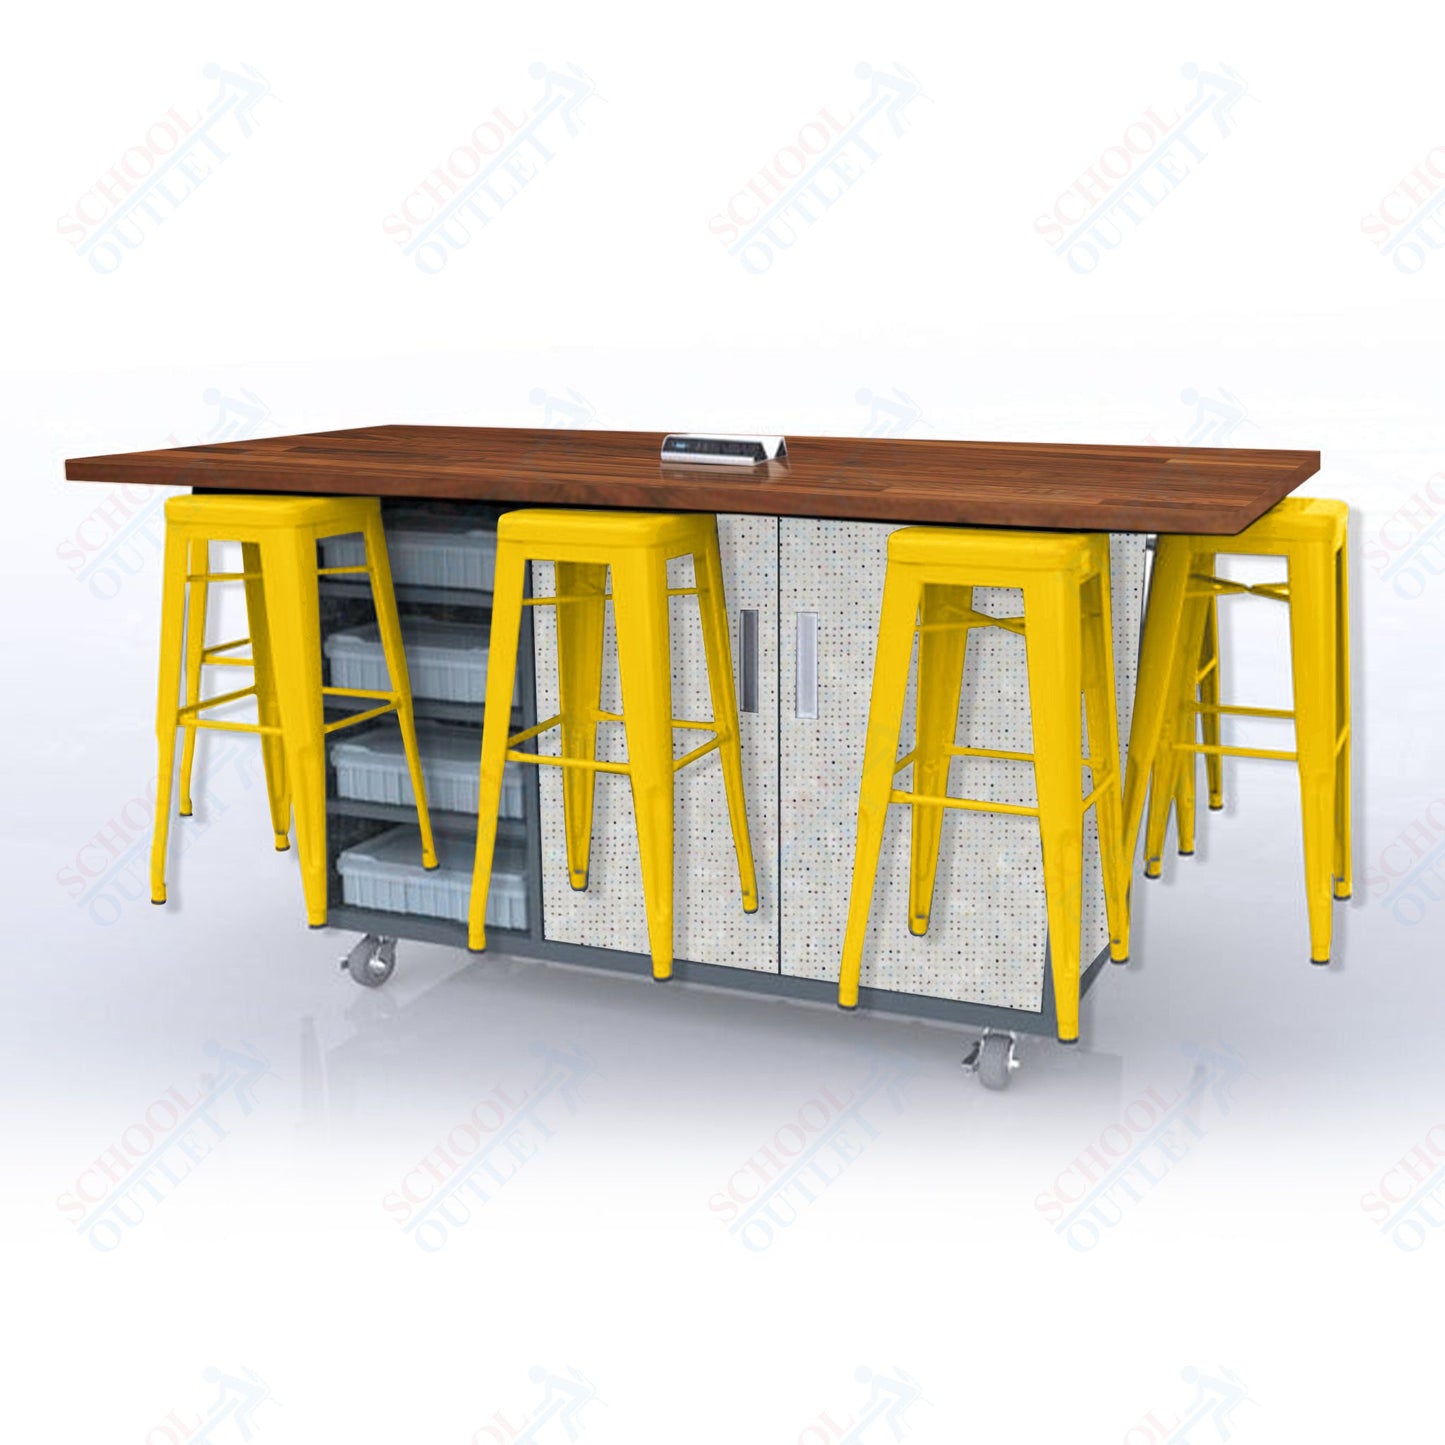 CEF ED8 Table 42"H Butcher Block Top, Laminate Base with  8 Stools, Storage bins, and Electrical Outlets Included.